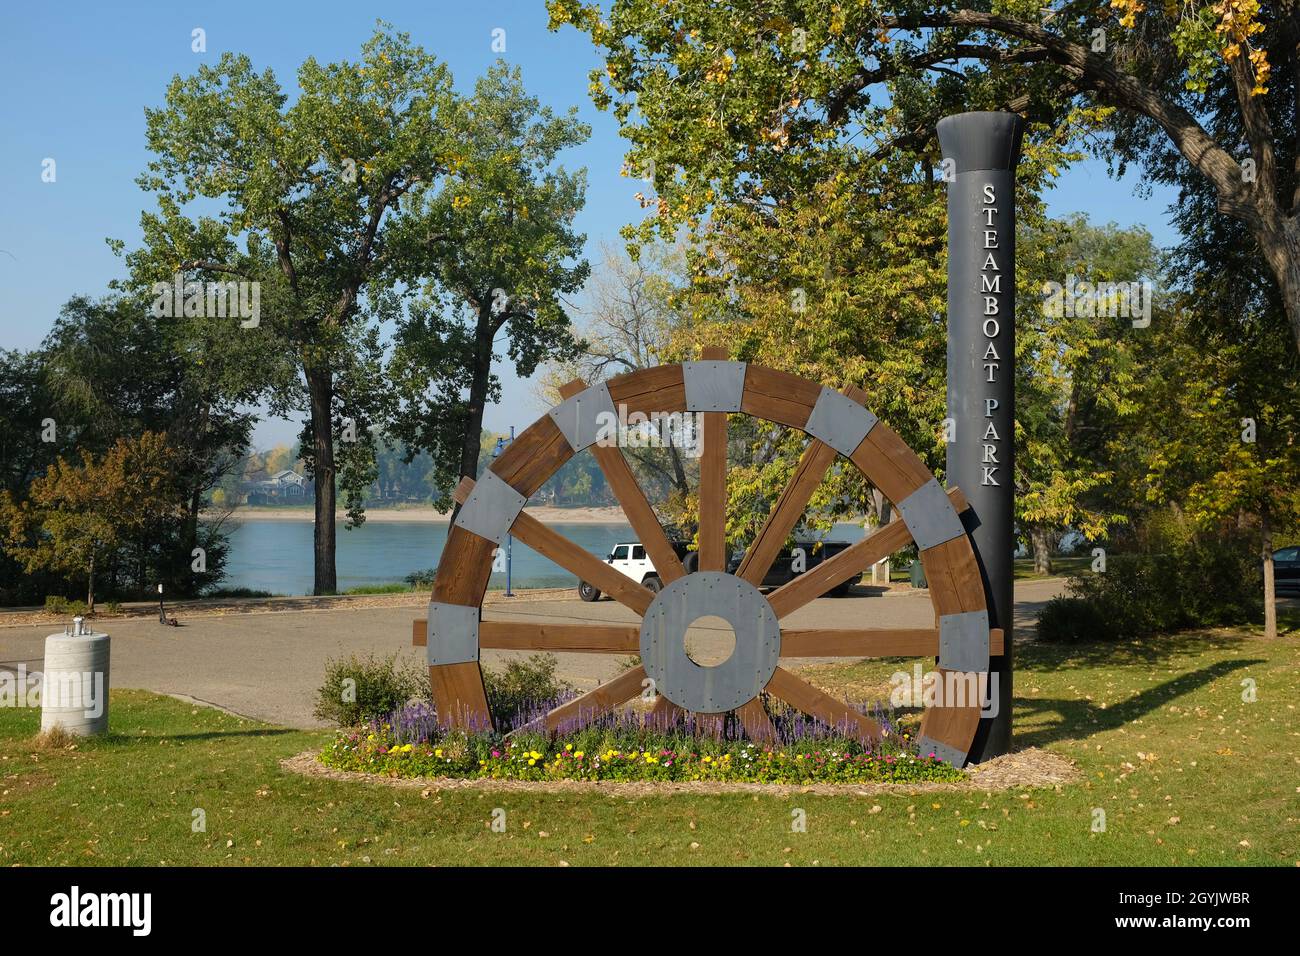 BISMARCK, NORTH DAKOTA - 3 OCT 2021: Sign at Steamboat Park along the Missouri River features trails and a replica paddlewheeler. Stock Photo